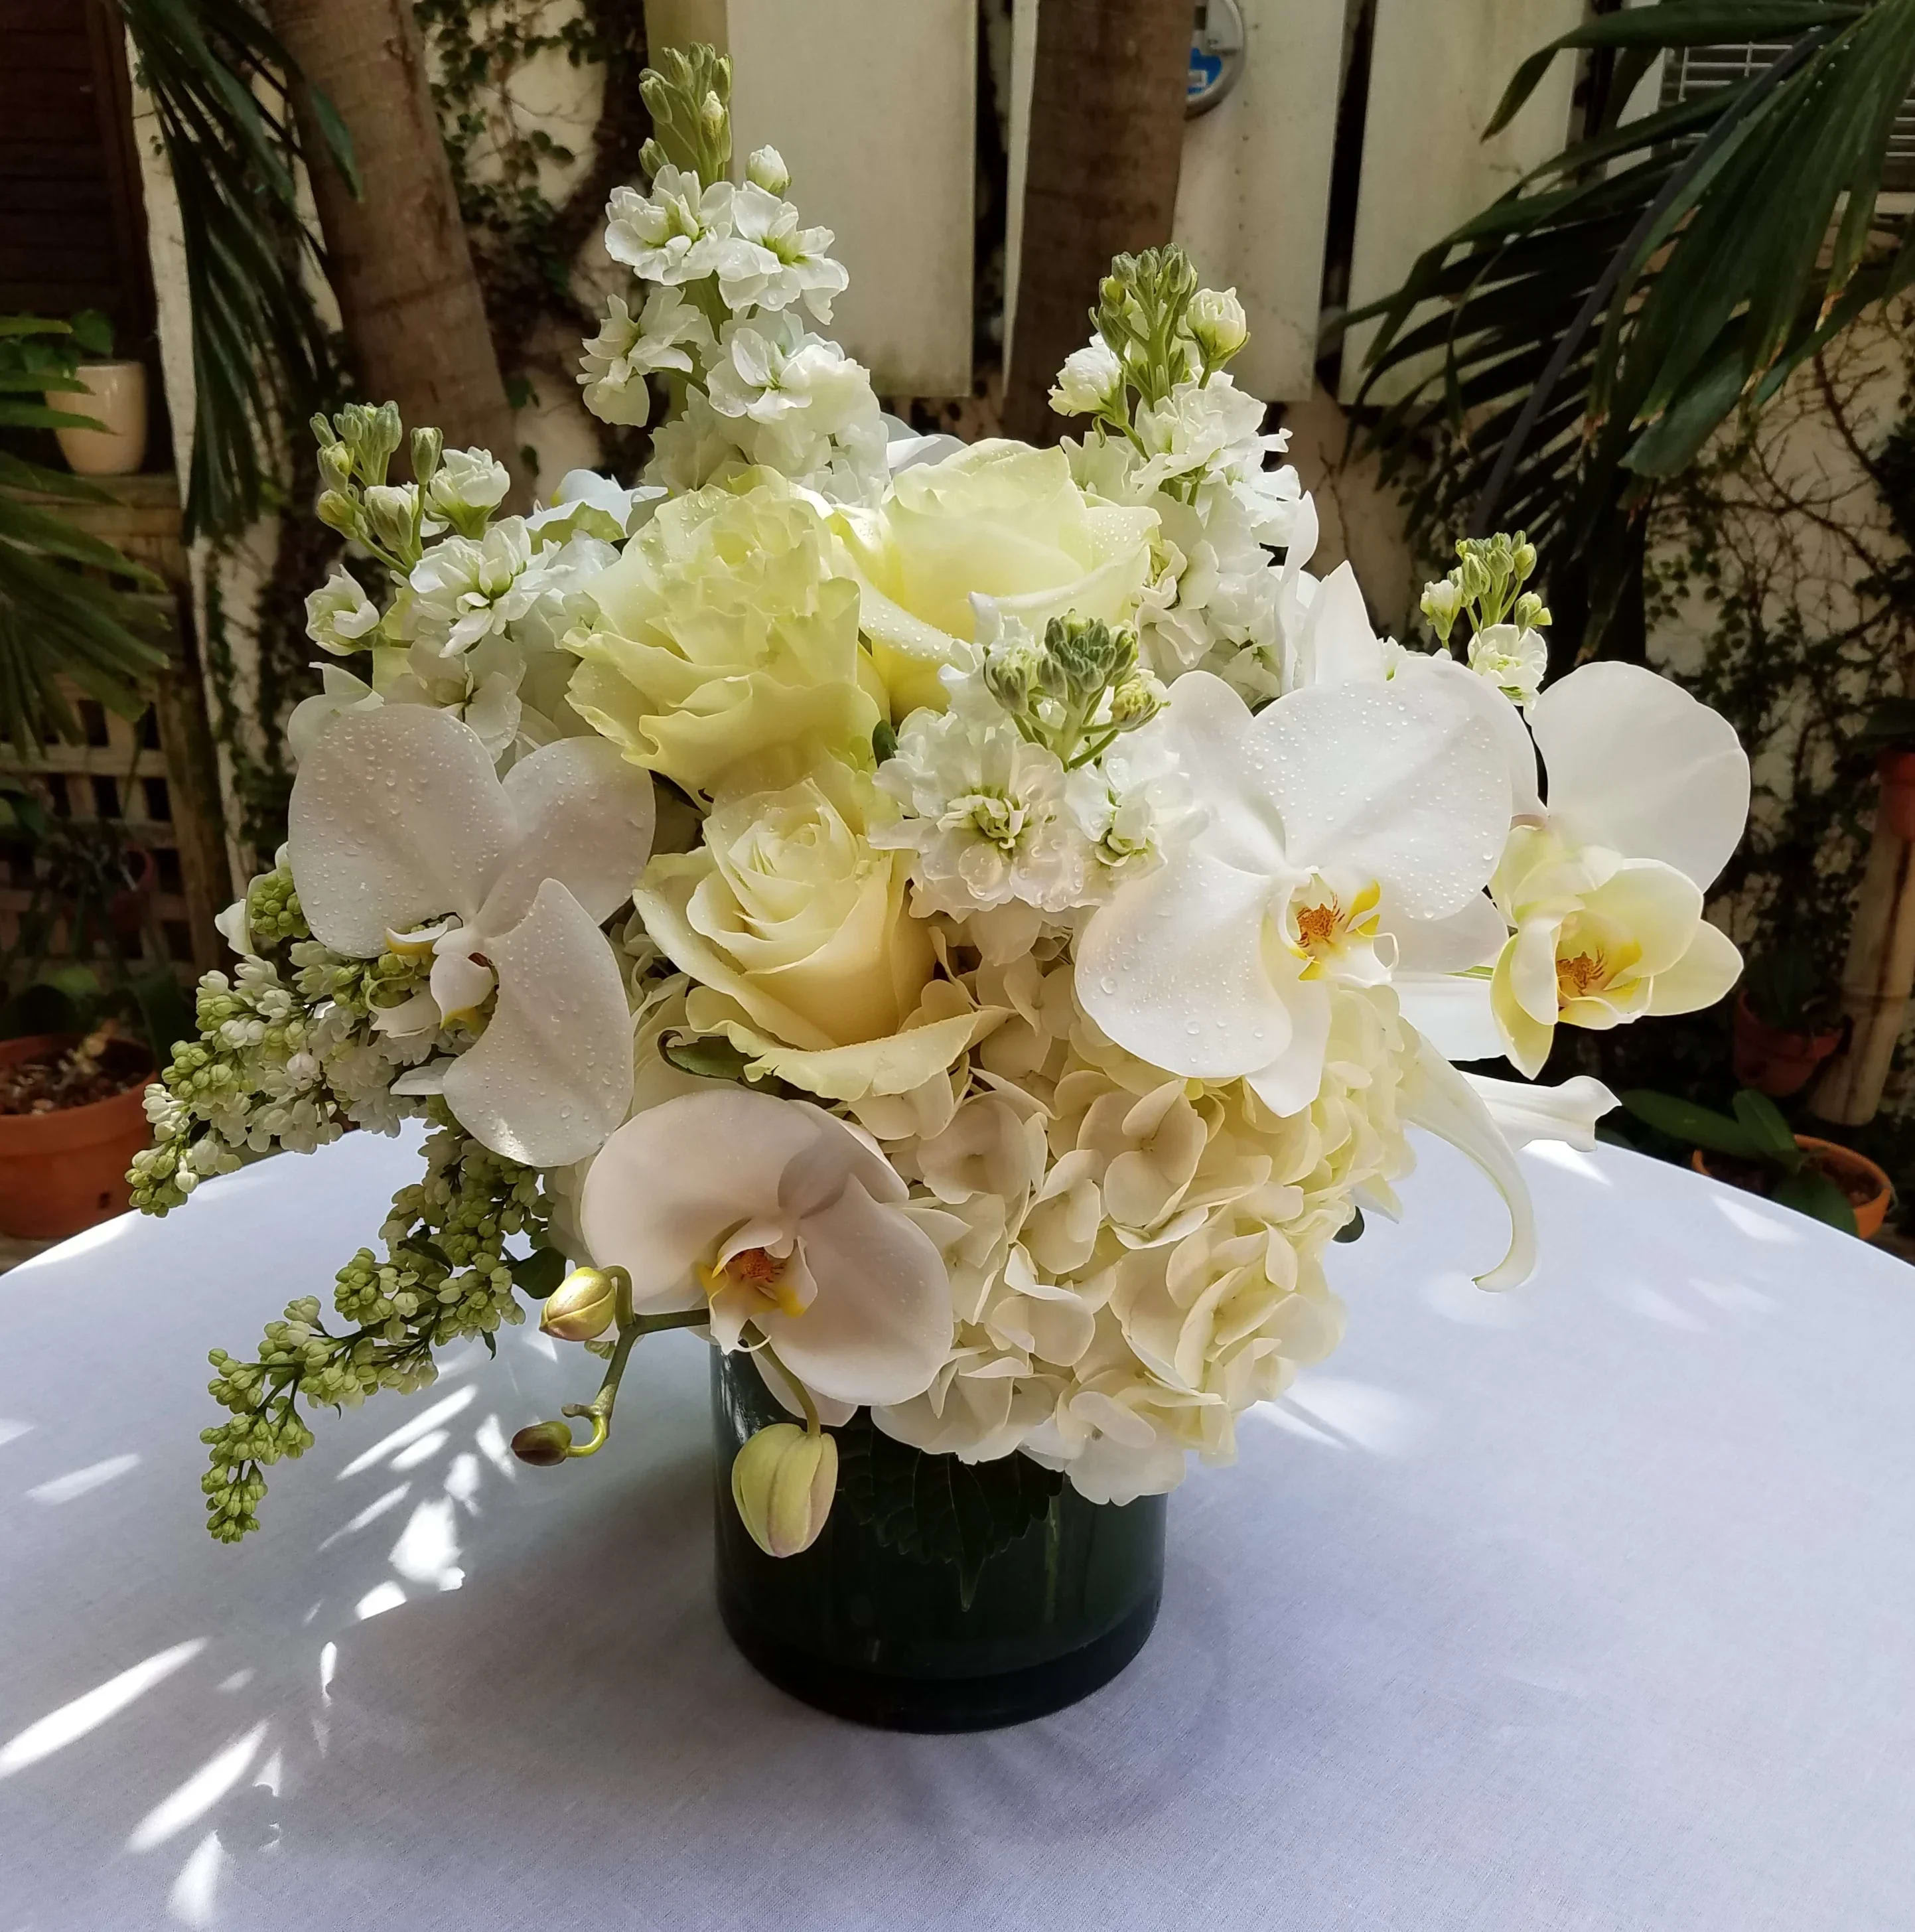  Romance Bouquet - You will love this romantic and elegant all white cylinder arrangement. It is different and super delicate, including the season's best white flowers such as white hydrangeas blooms, white stock, roses and phalaenopsis orchids  **Pot color may vary**  At Belden's Florist we stand behind the quality of our products. We guarantee that our flowers will remain fresh and beautiful for 3-5 days after delivery. As cut flowers, they may naturally start to wilt beyond this timeframe. However, we ensure that you receive the freshest blooms possible, carefully selected and expertly arranged to bring joy and elegance to your space. To help your flowers stay fresher longer, we recommend adding fresh water to the vase regularly. Just like you, flowers need hydration to thrive, and refreshing the water allows them to drink up and continue to dazzle you with their beauty.